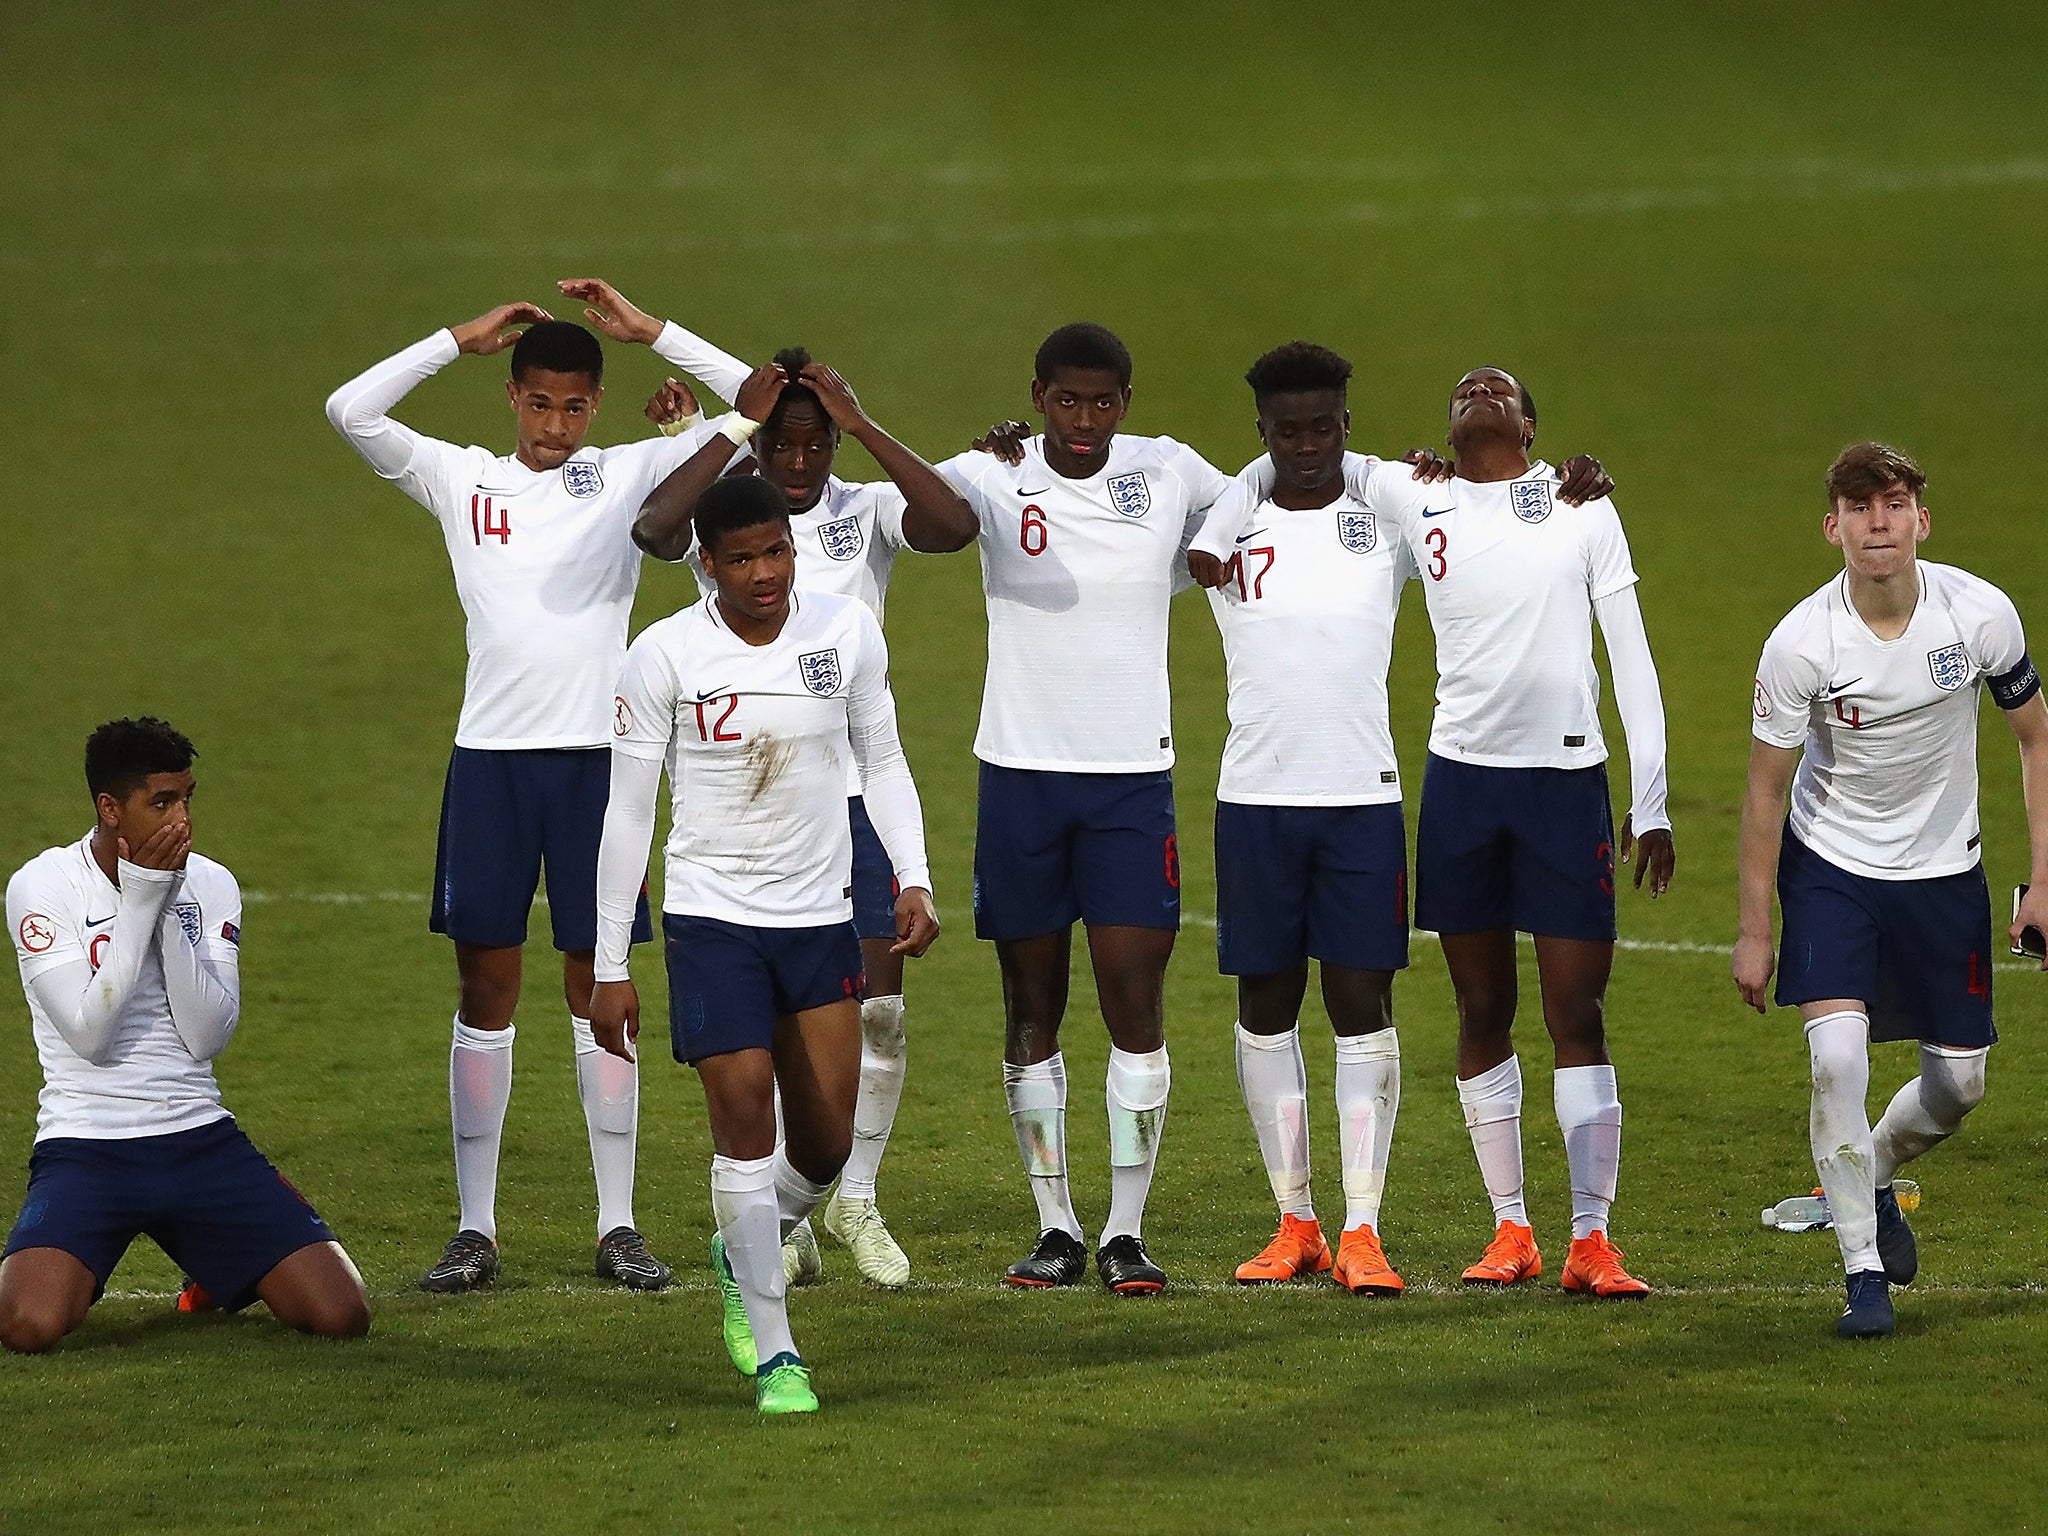 England were knocked out of the European Under-17s Championship semi-finals in a penalty shootout